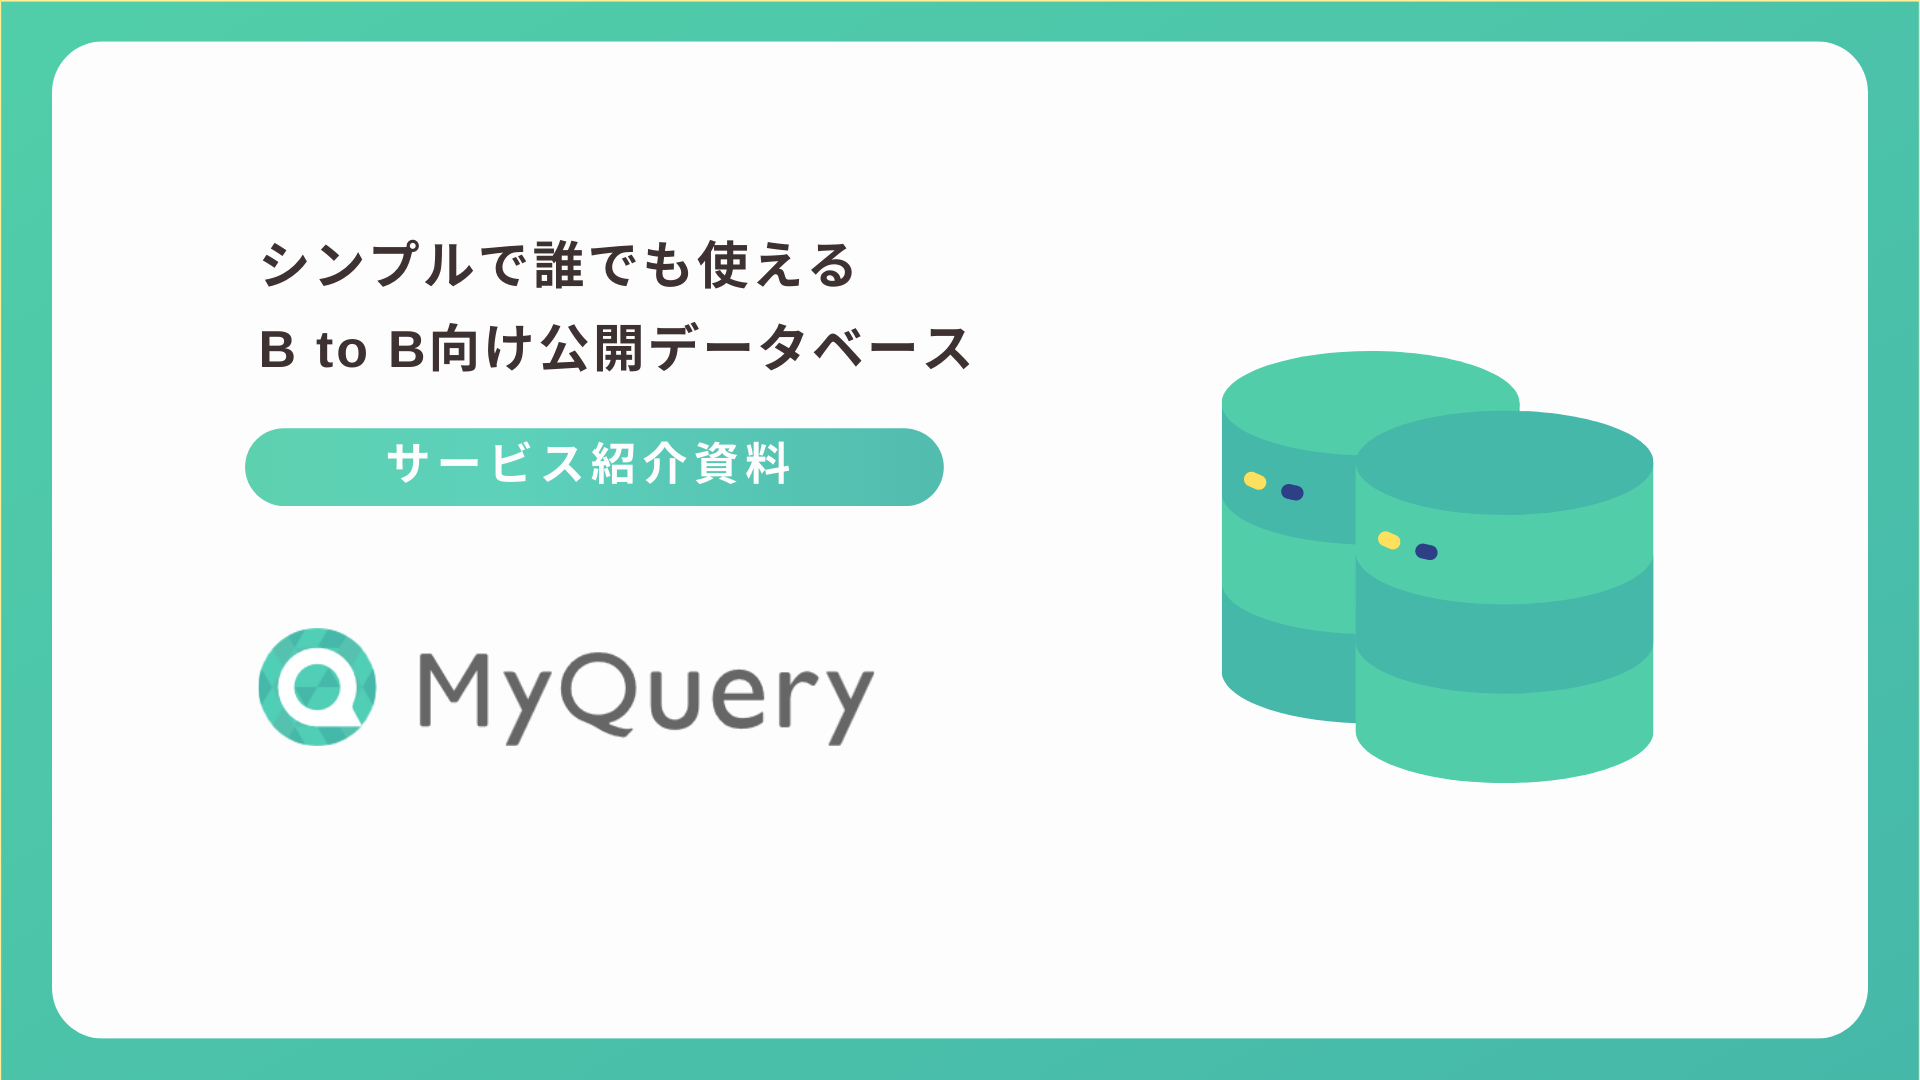 MyQuery サービス紹介資料